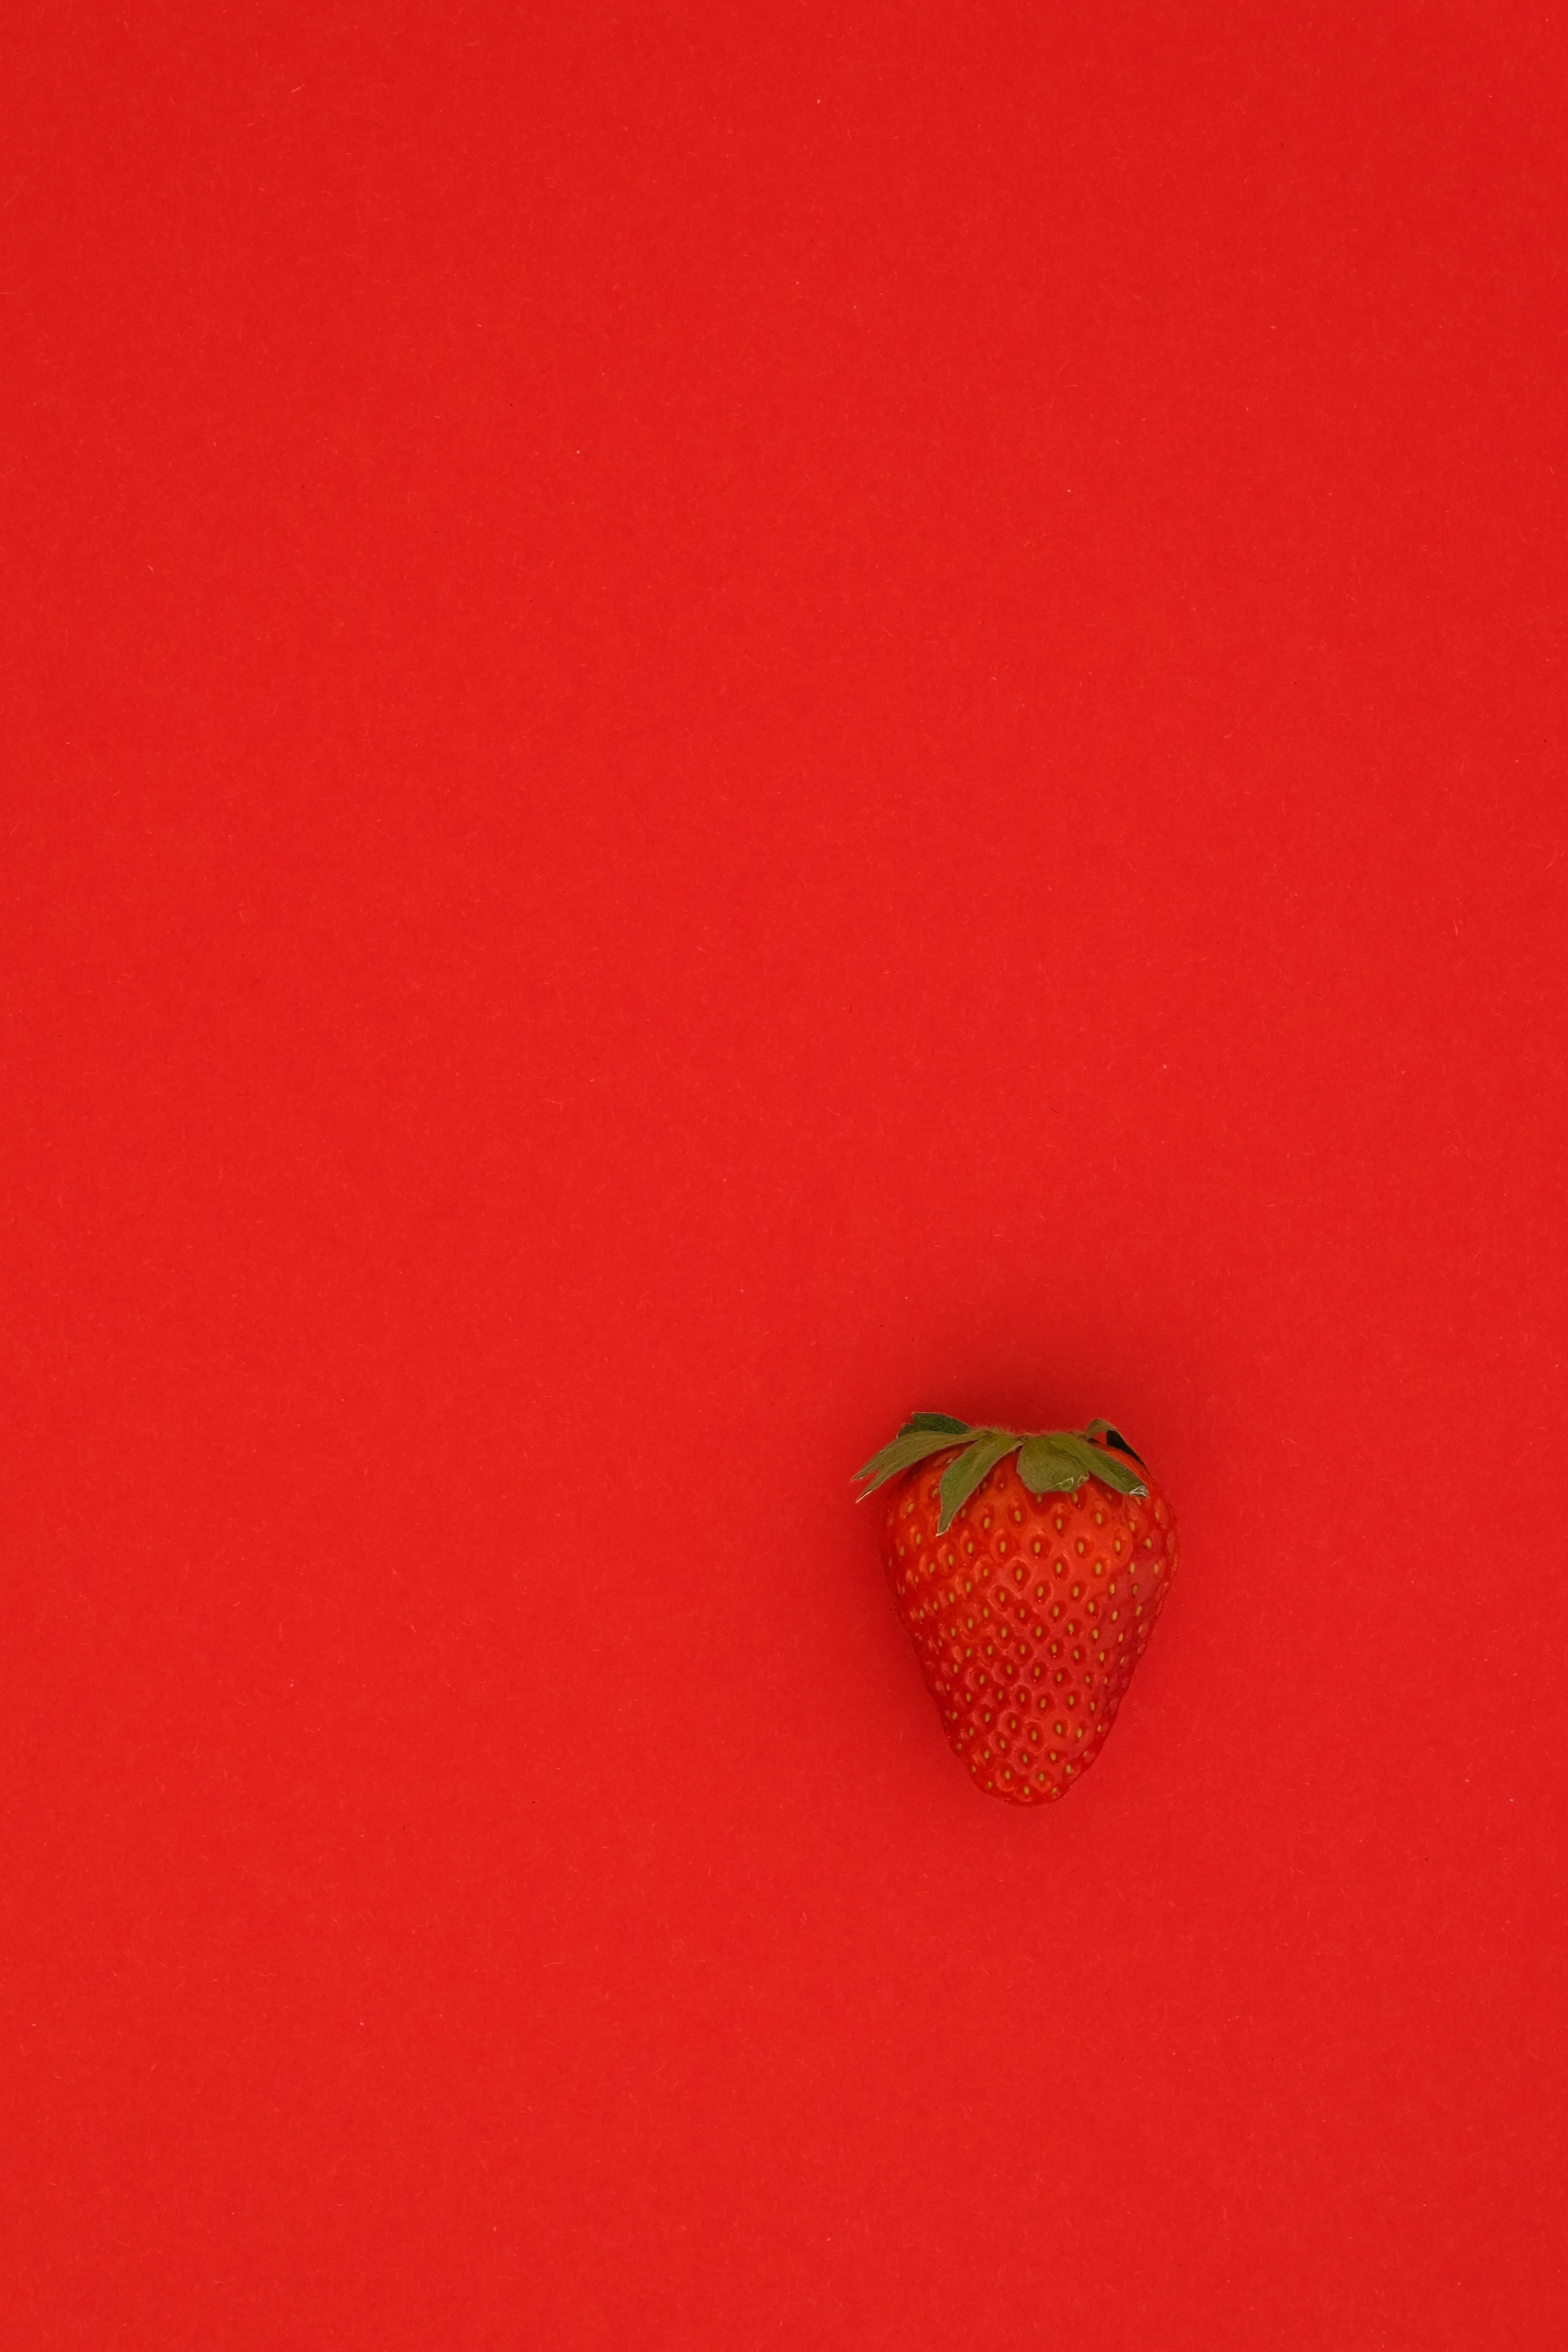 strawberry, red background, berry, food 32K